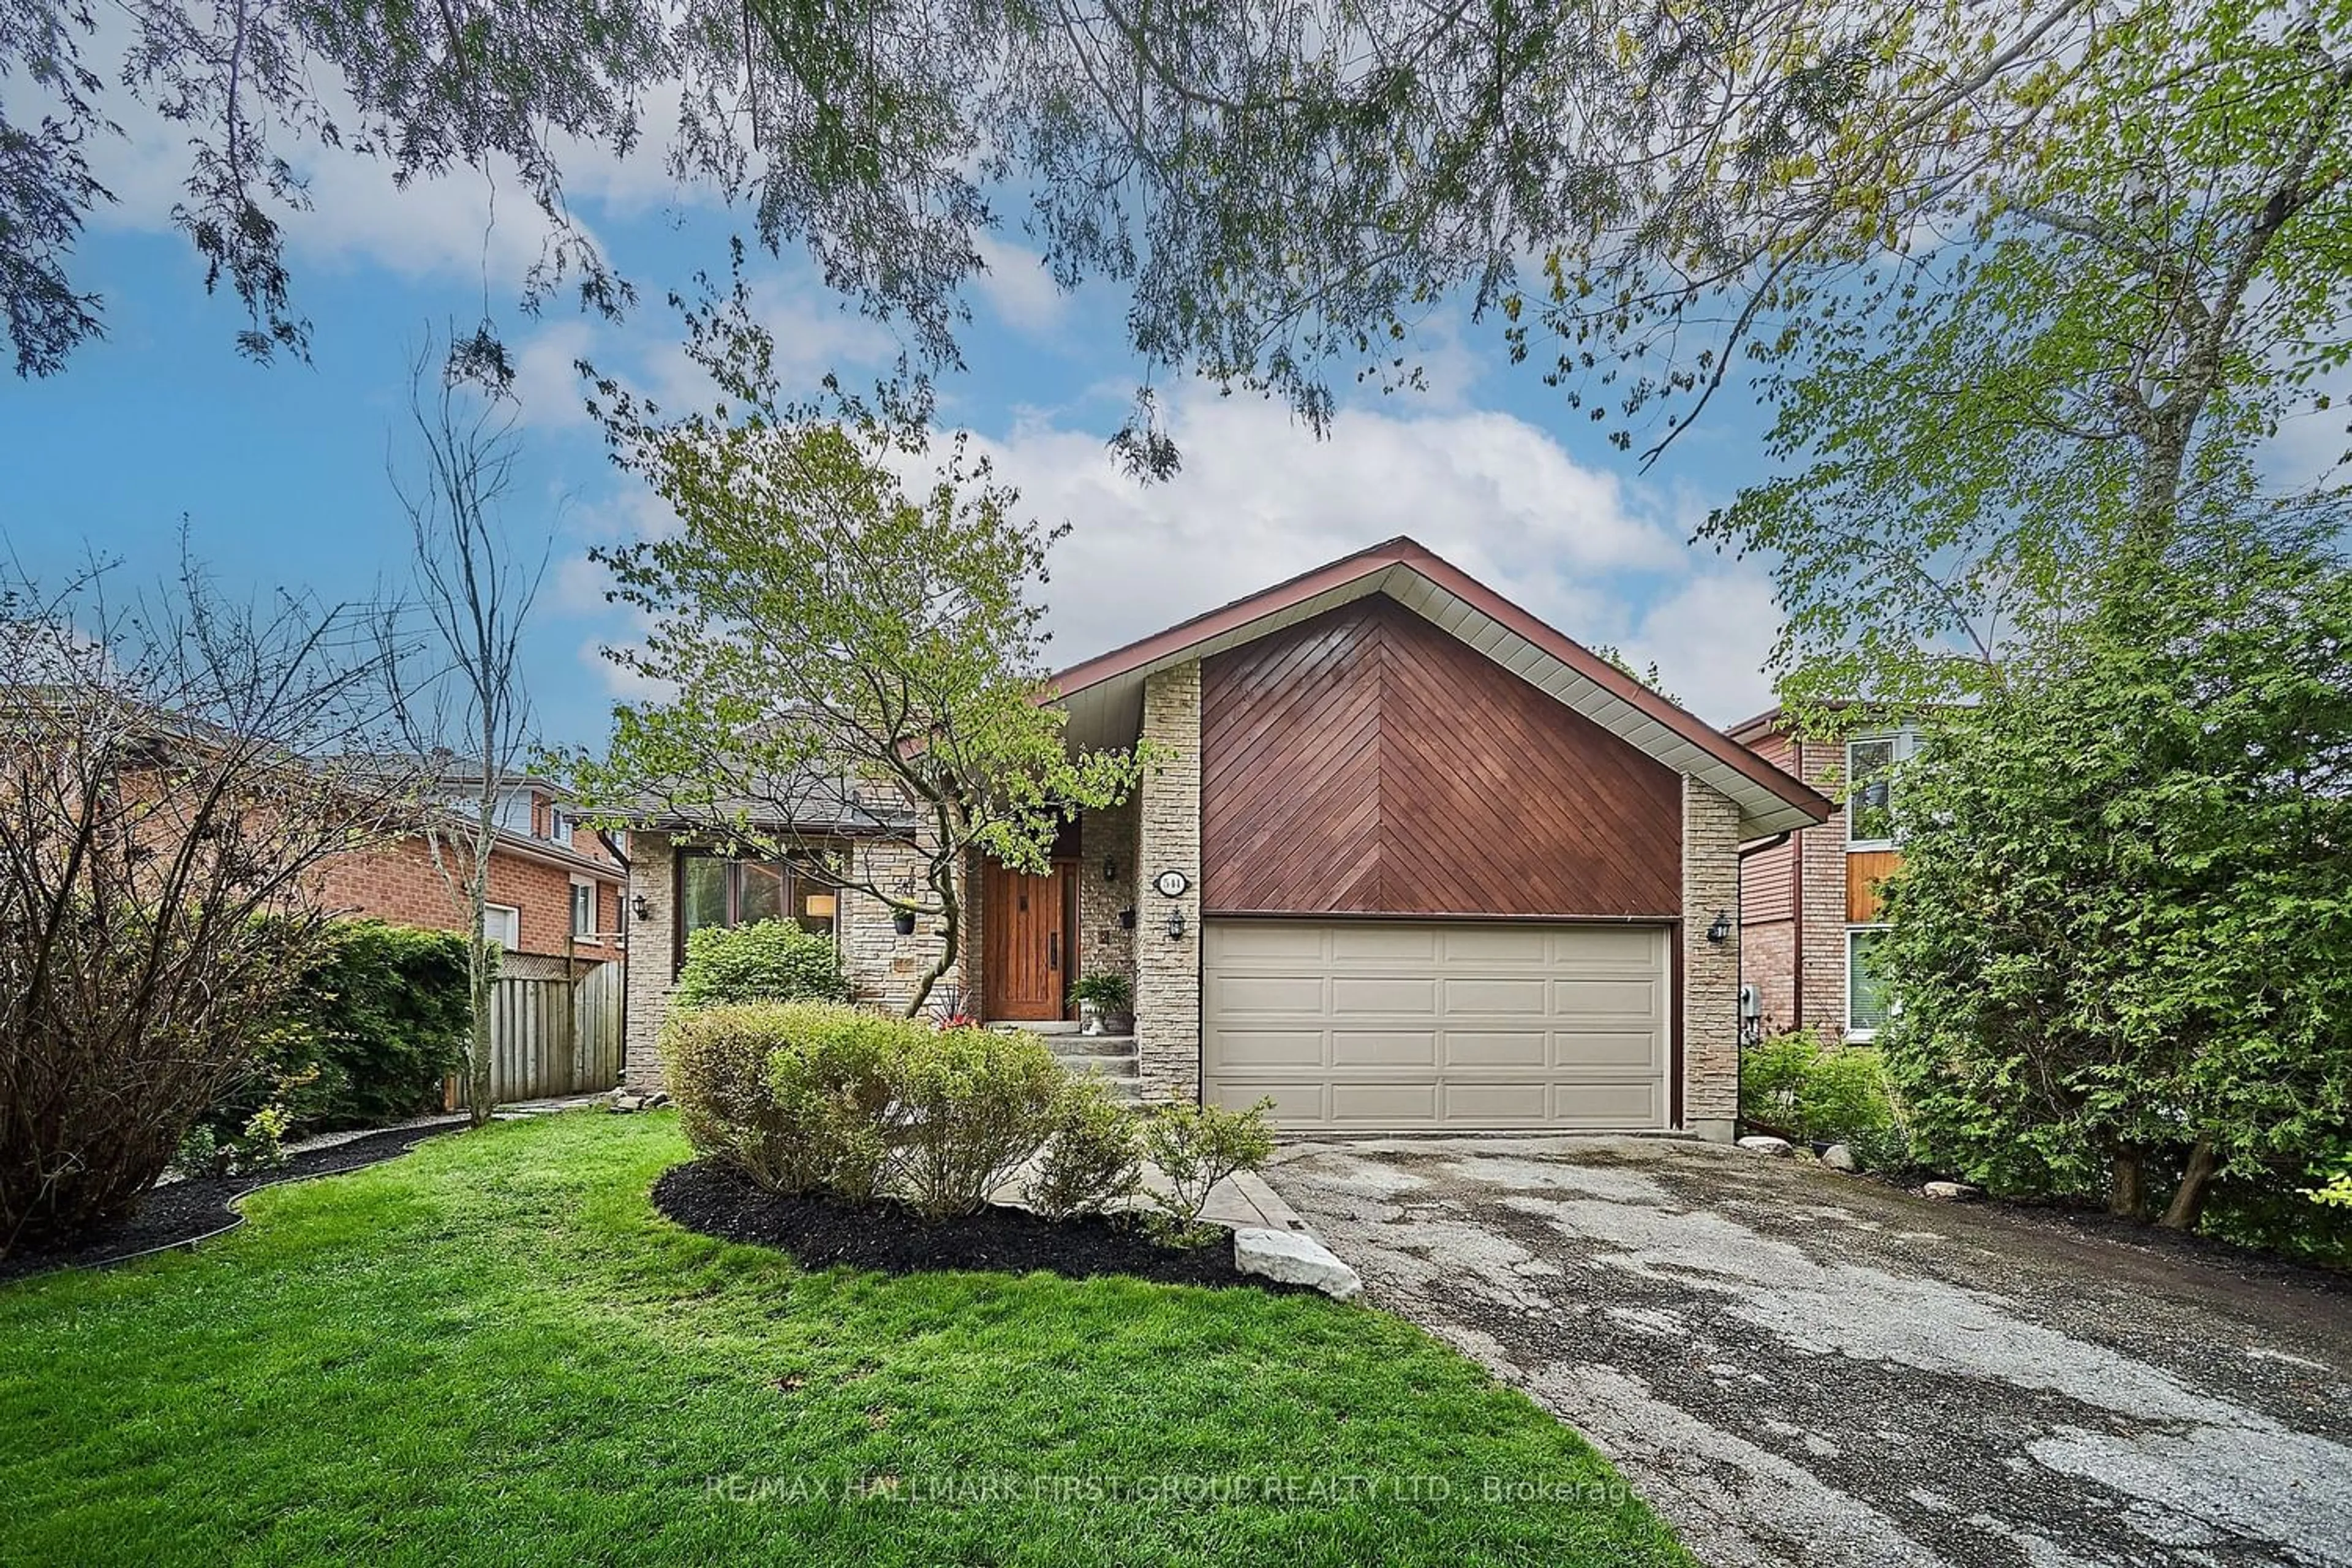 Home with brick exterior material for 541 Oakwood Dr, Pickering Ontario L1W 2M8